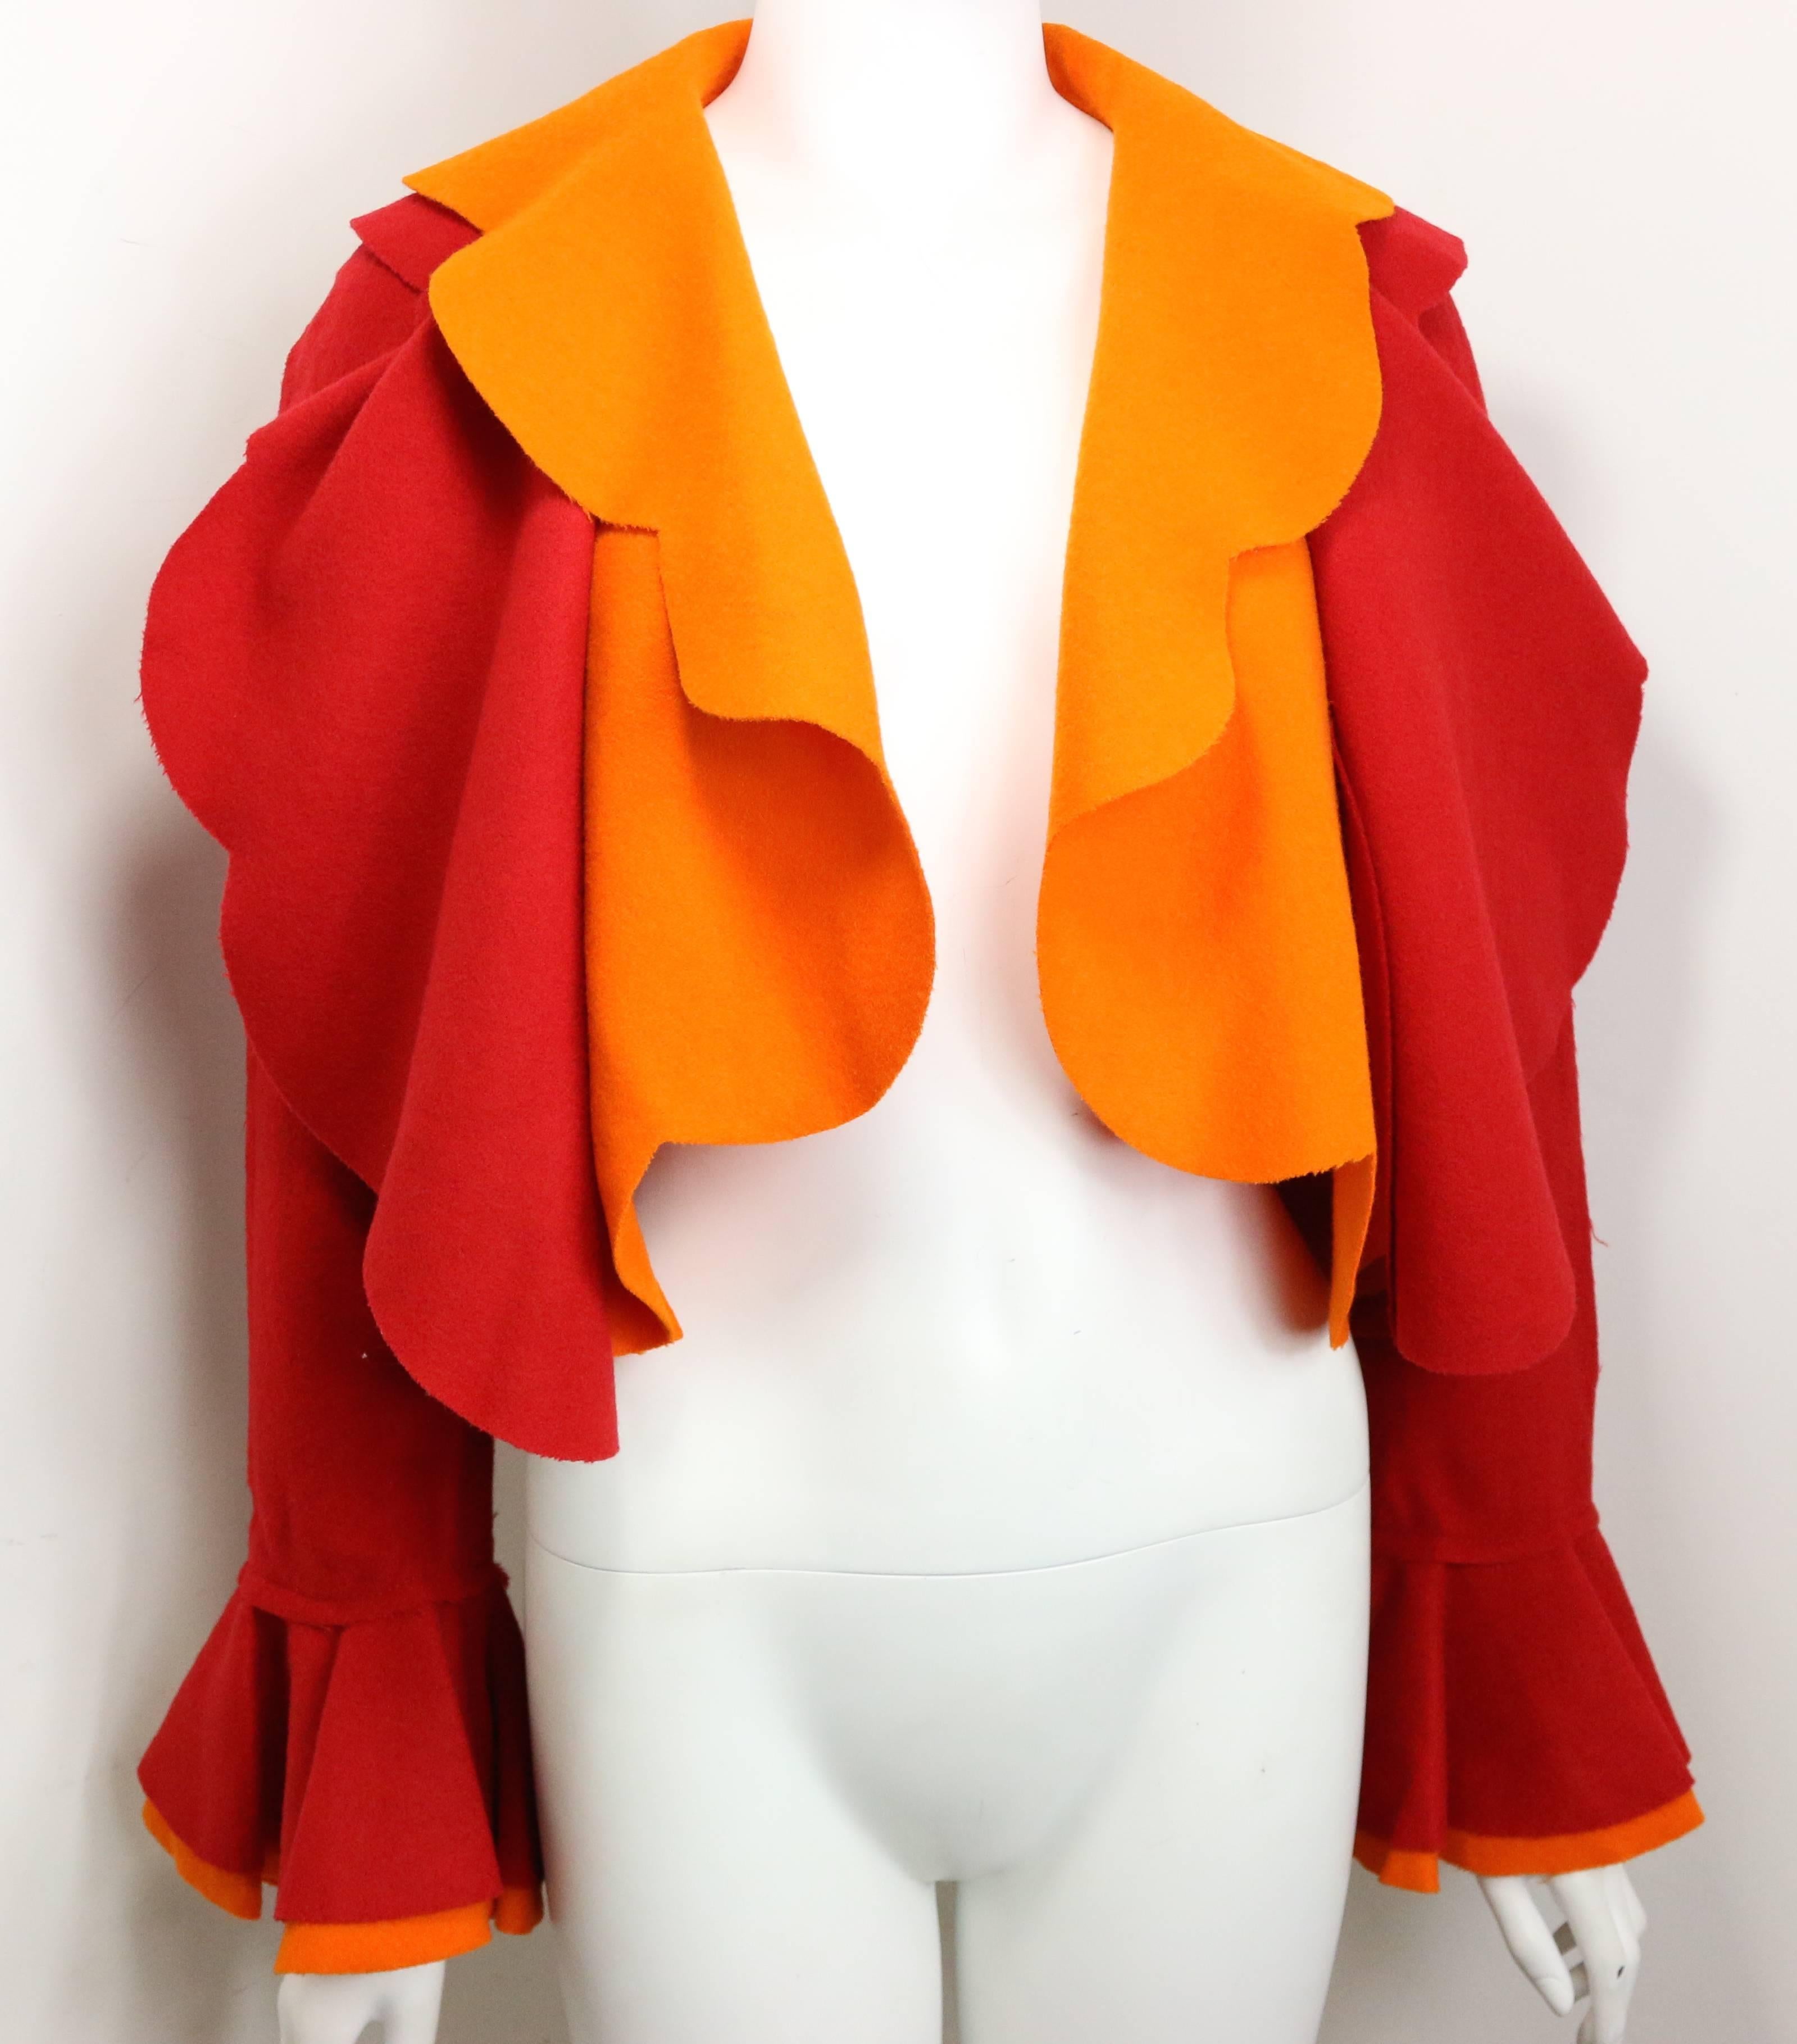 - Vintage 90s Moschino Couture red and orange wool cropped ruffle jacket. This beautiful jacket is double layered on the front and the cuff. The colour is vivid and the ruffle makes you feel like spring flower blouson. 

- Made in Italy. 

-